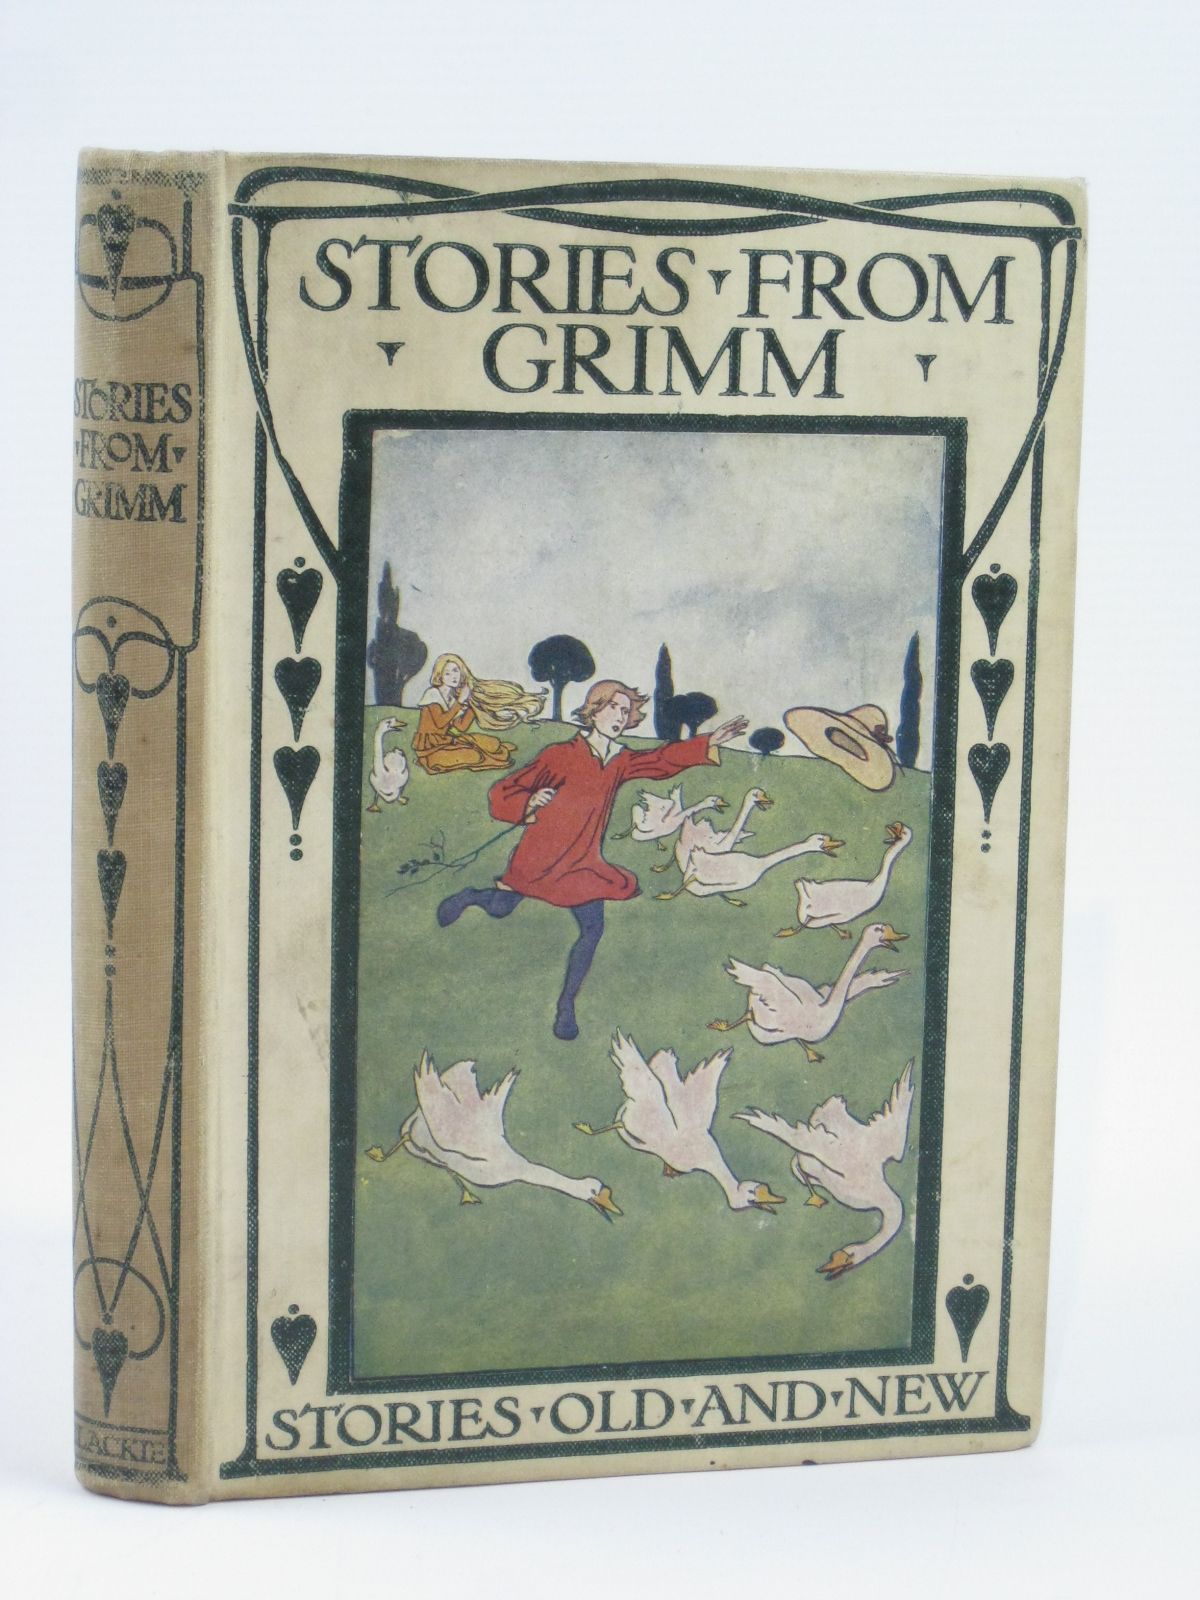 Cover of STORIES FROM GRIMM by Brothers Grimm